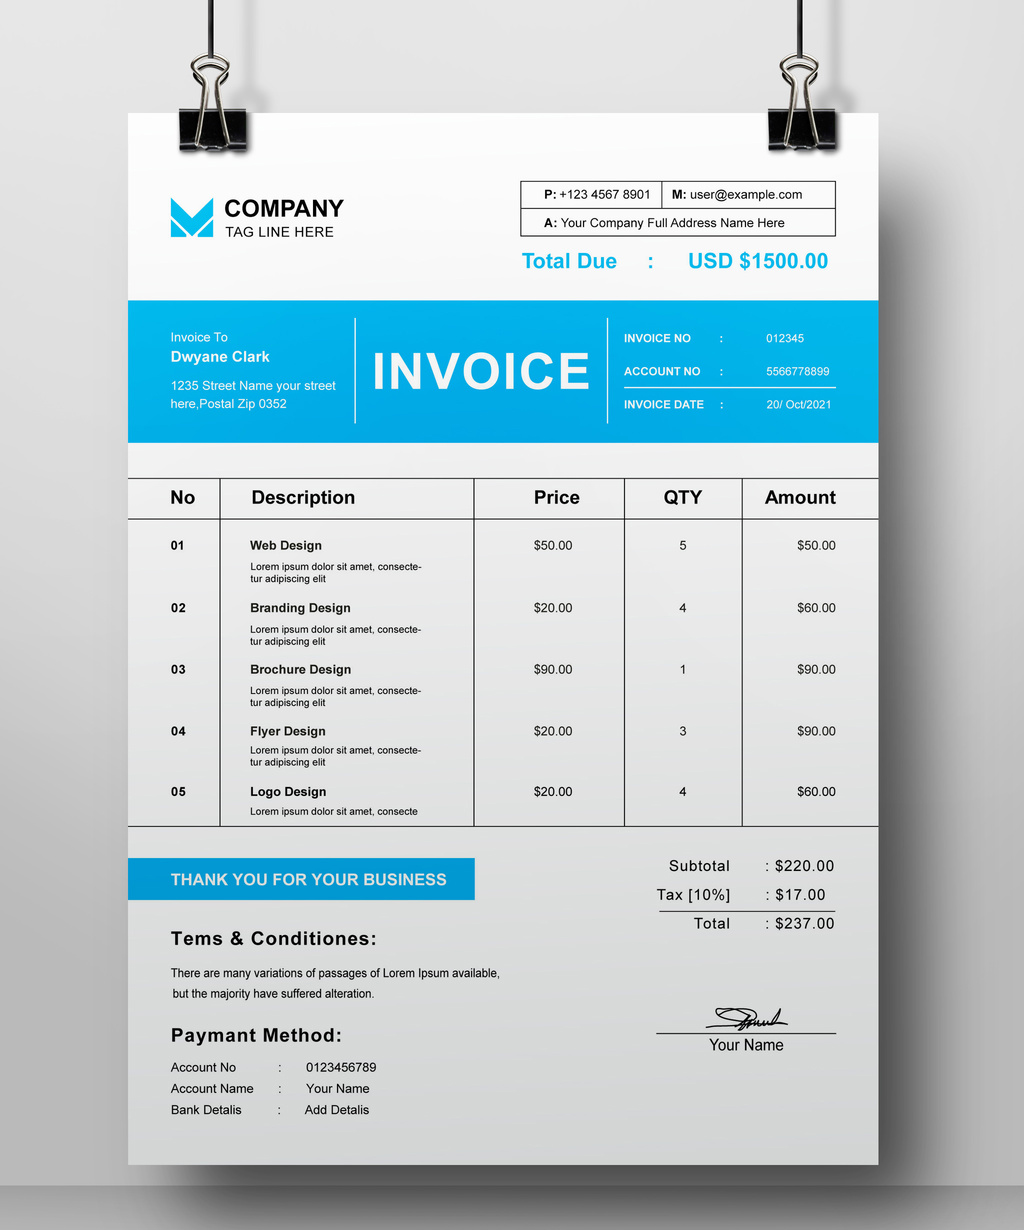 Invoice Layout with Blue Accents (AI Format)